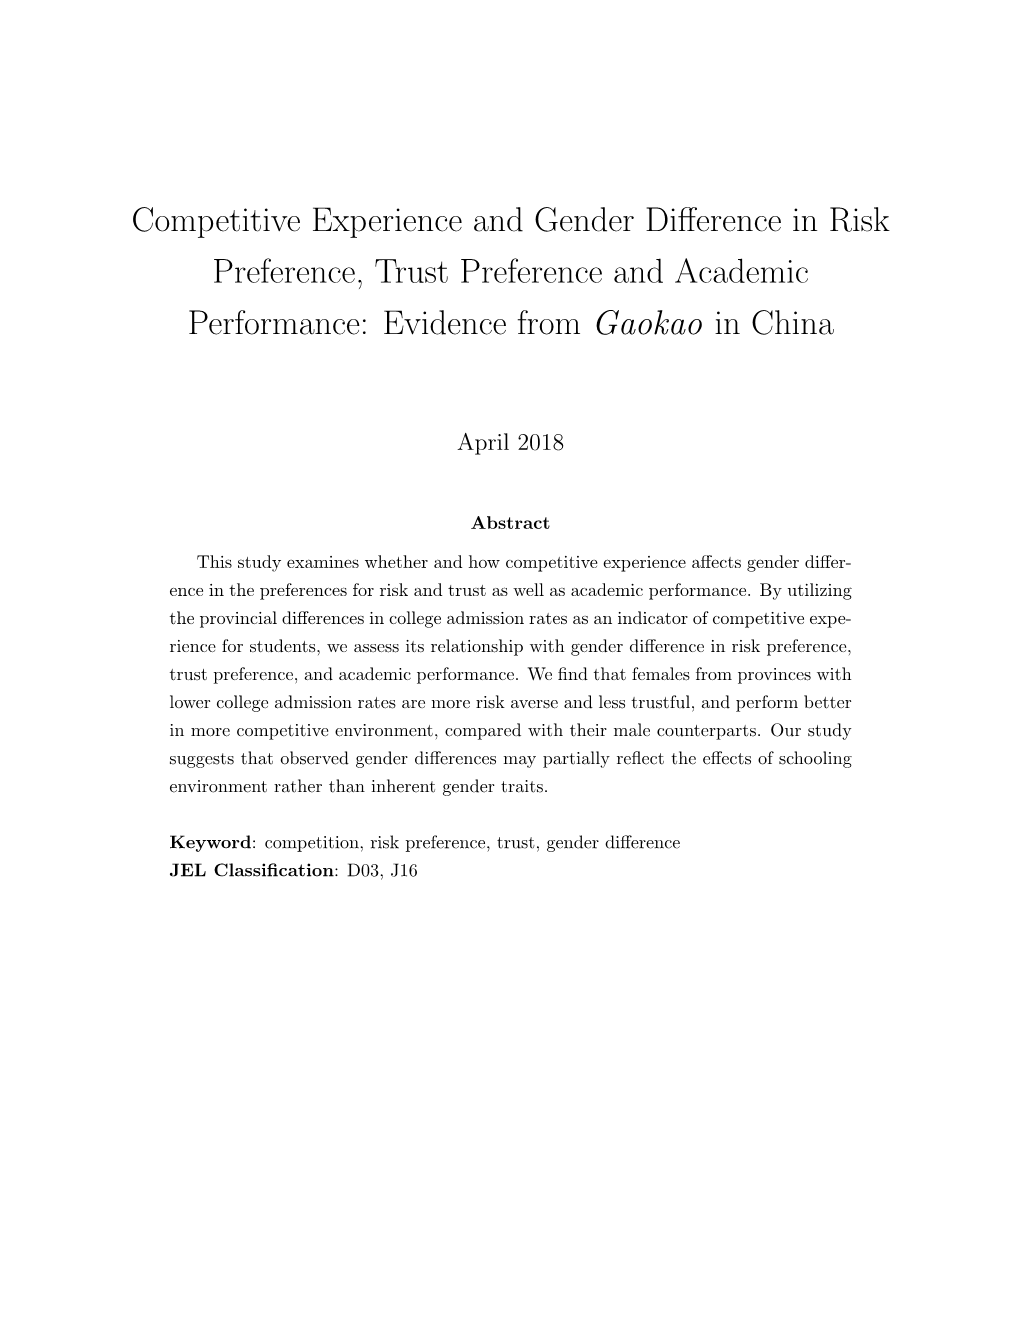 Competitive Experience and Gender Difference in Risk Preference, Trust Preference and Academic Performance: Evidence from Gaokao